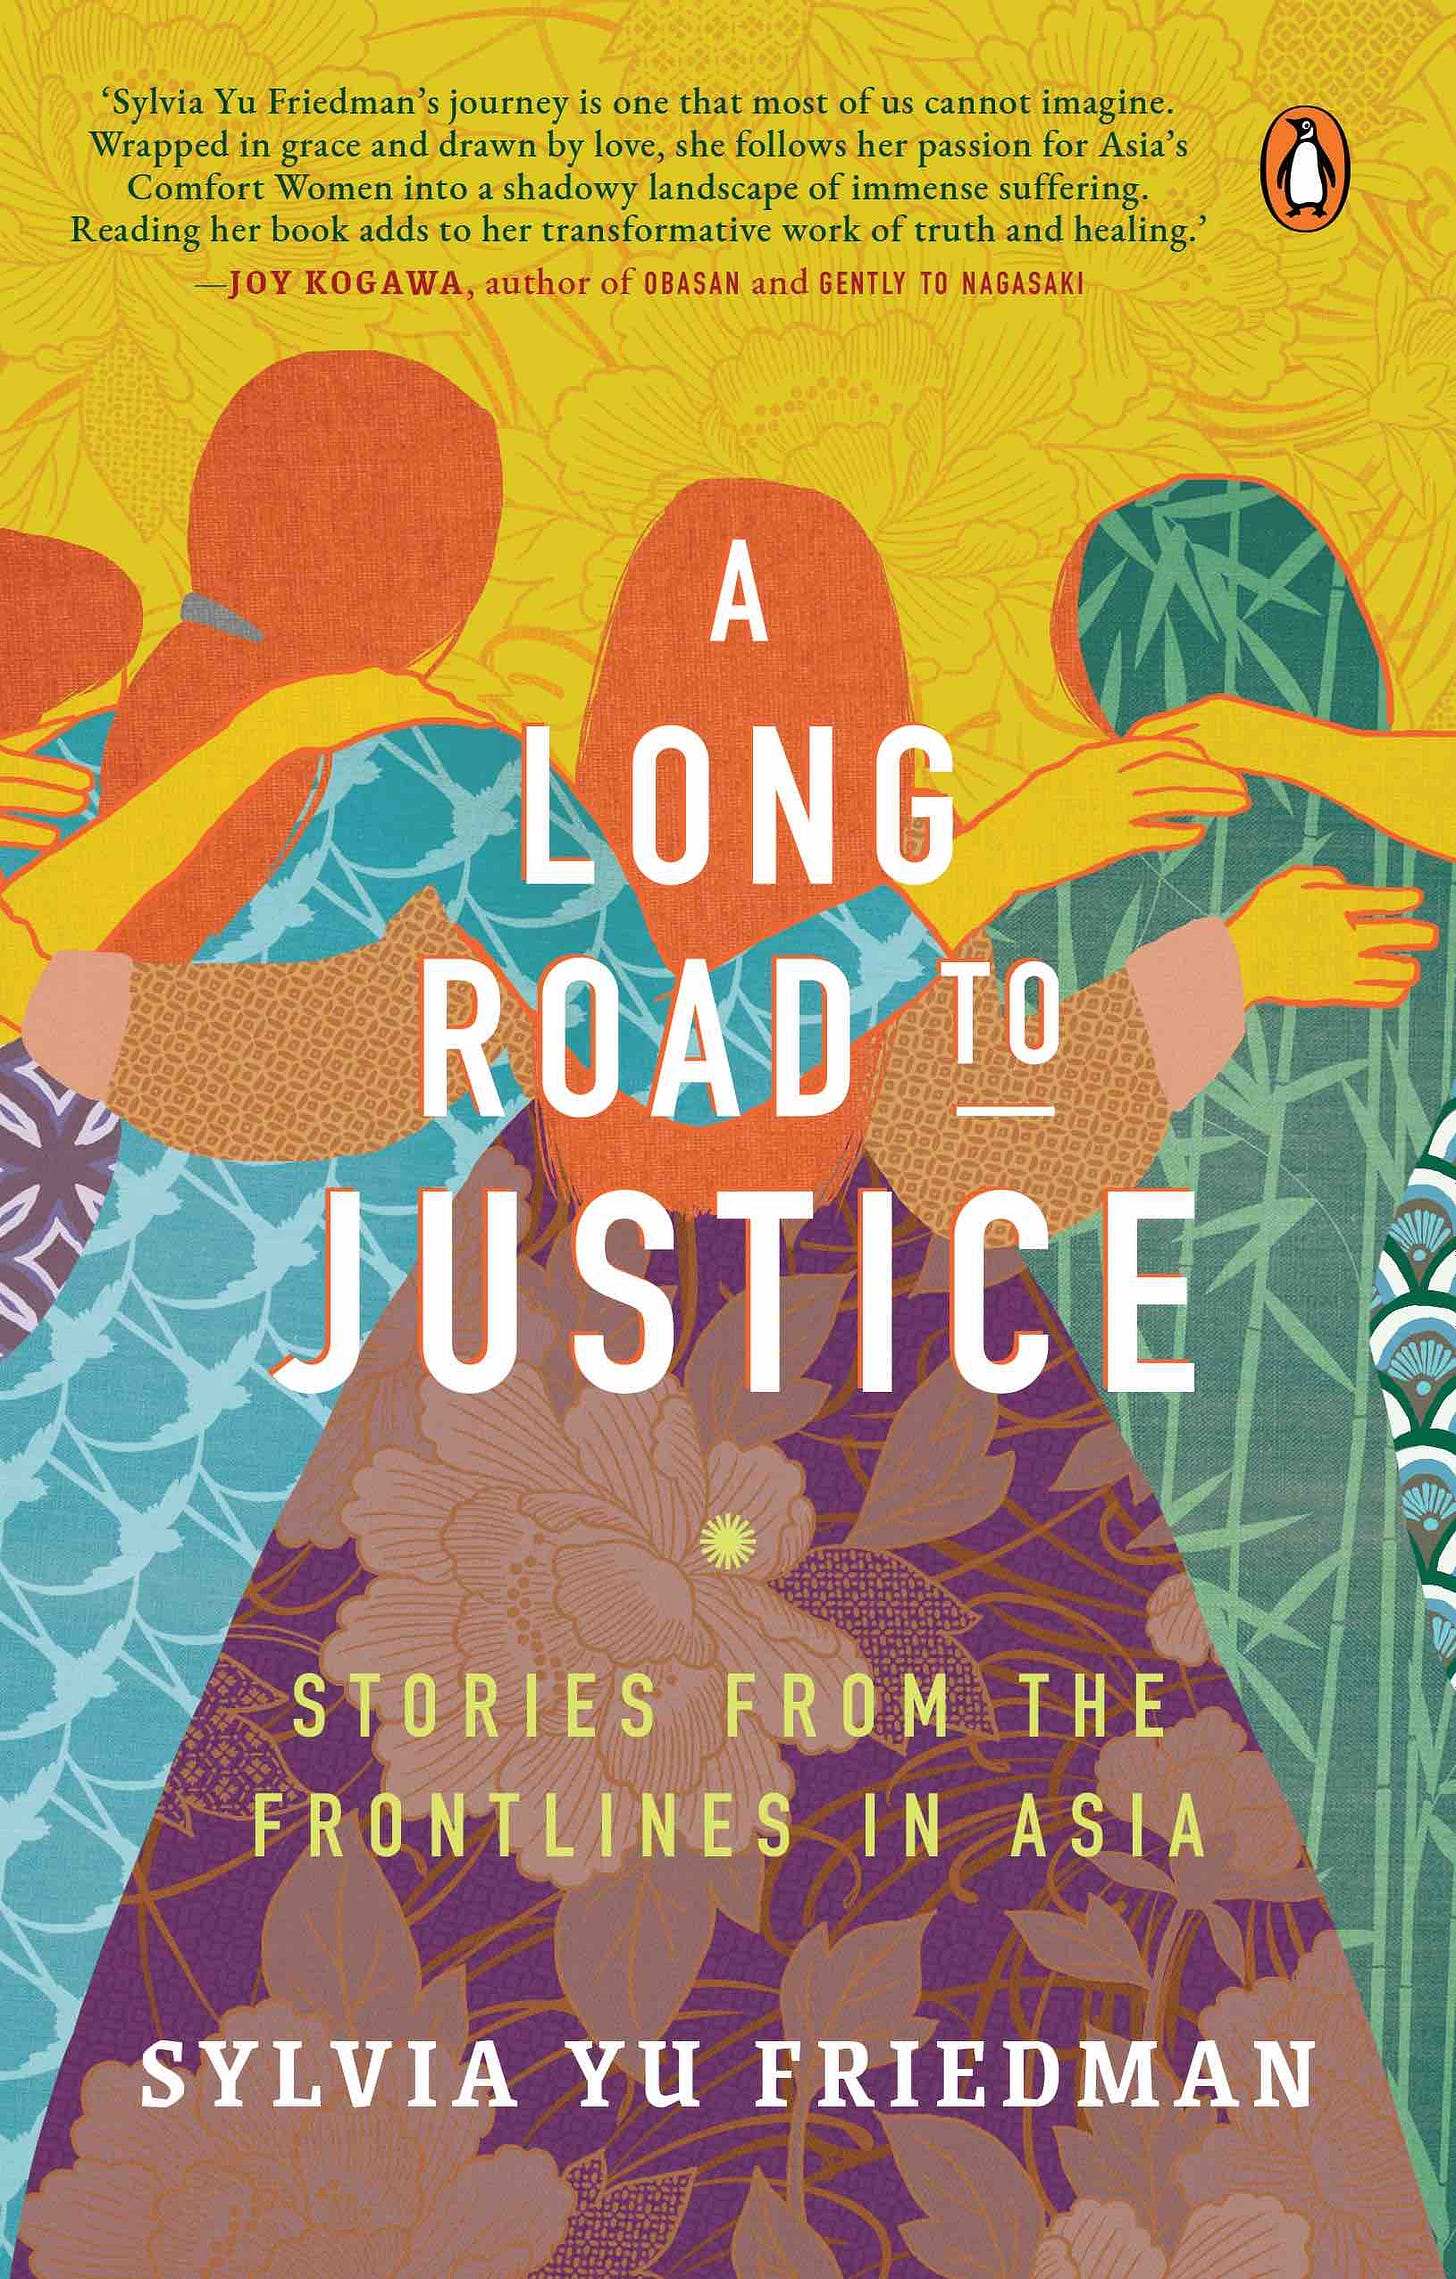 A Long Road to Justice by Sylvia Yu Friedman